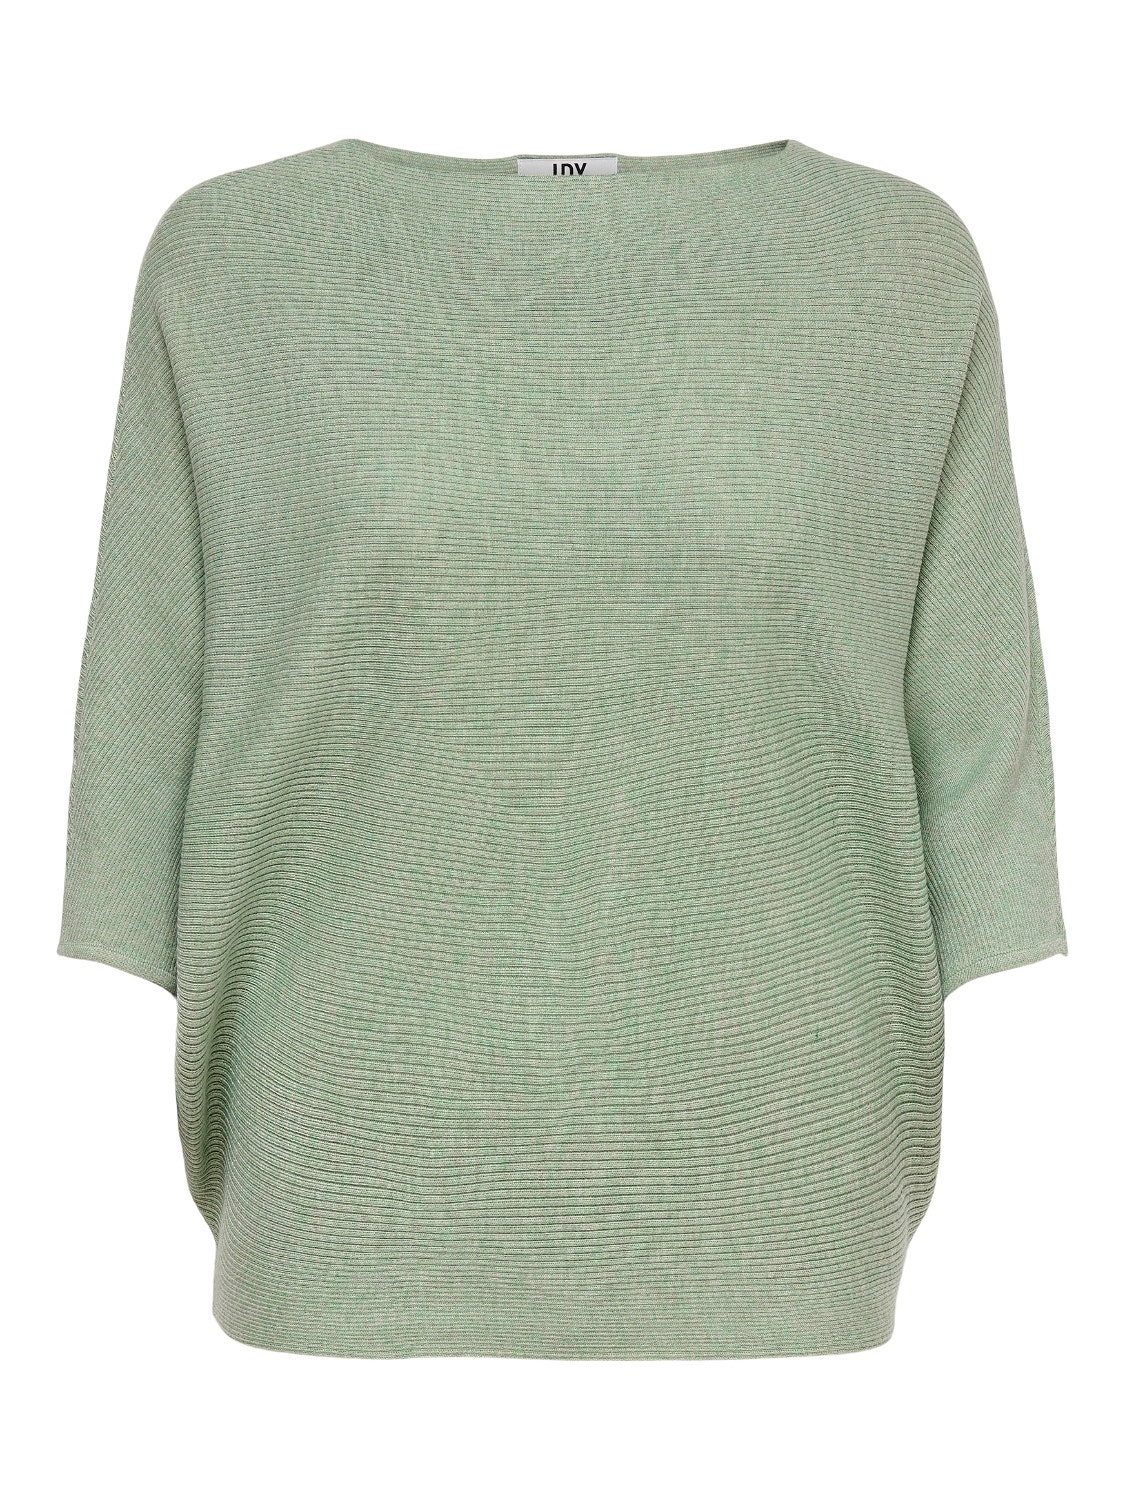 ONLY Boat neck Dropped shoulders Pullover -Basil - 15181237